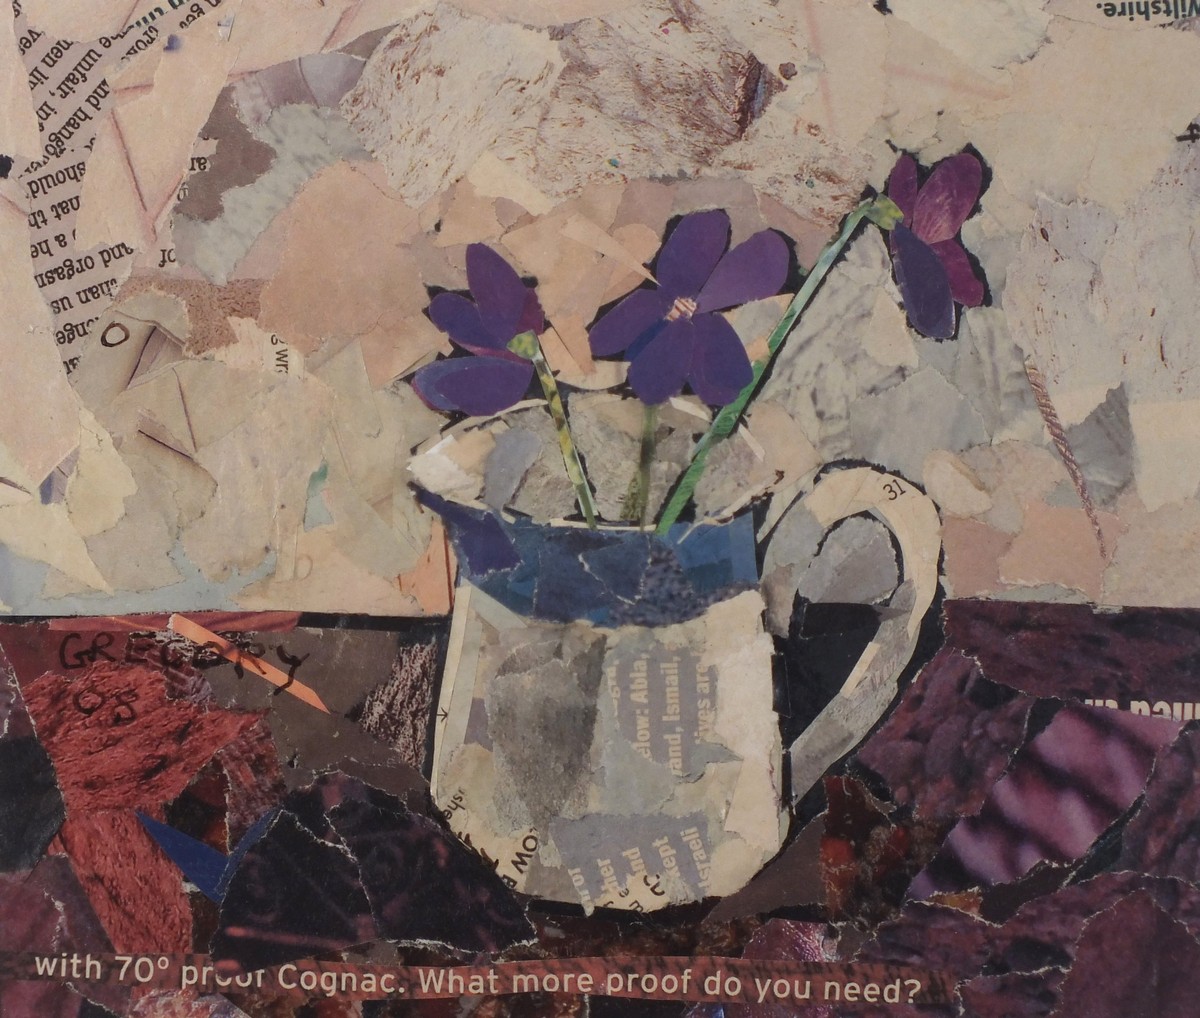 Annabelle GREGORY (British b, 1941) Joy of Violets, Collage, Signed and dated '08 mid left, titled